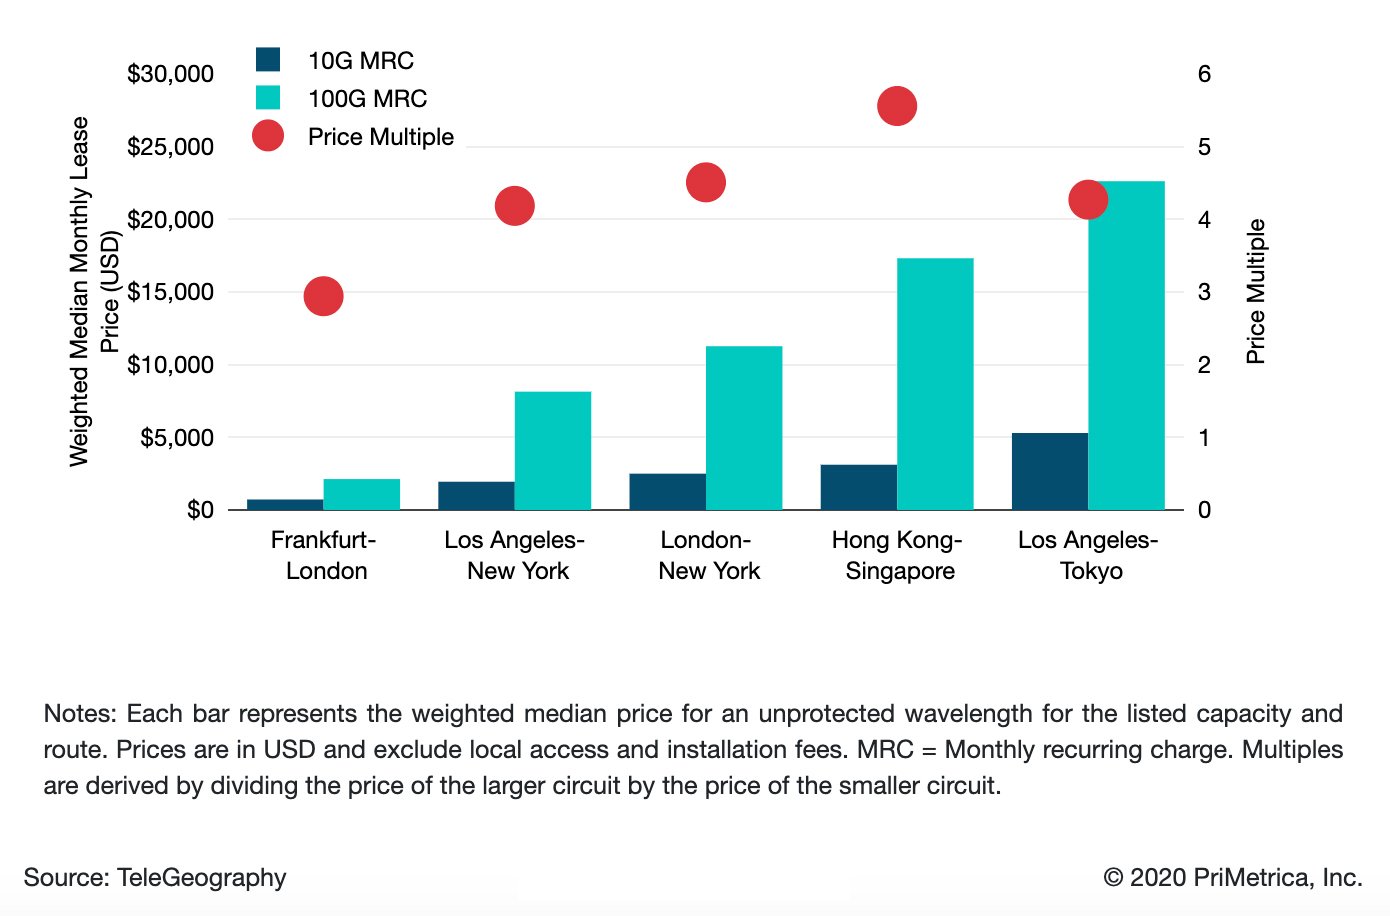 10 Gbps and 100 Gbps Wavelength Weighted Median Prices and Multiples on Select International Routes